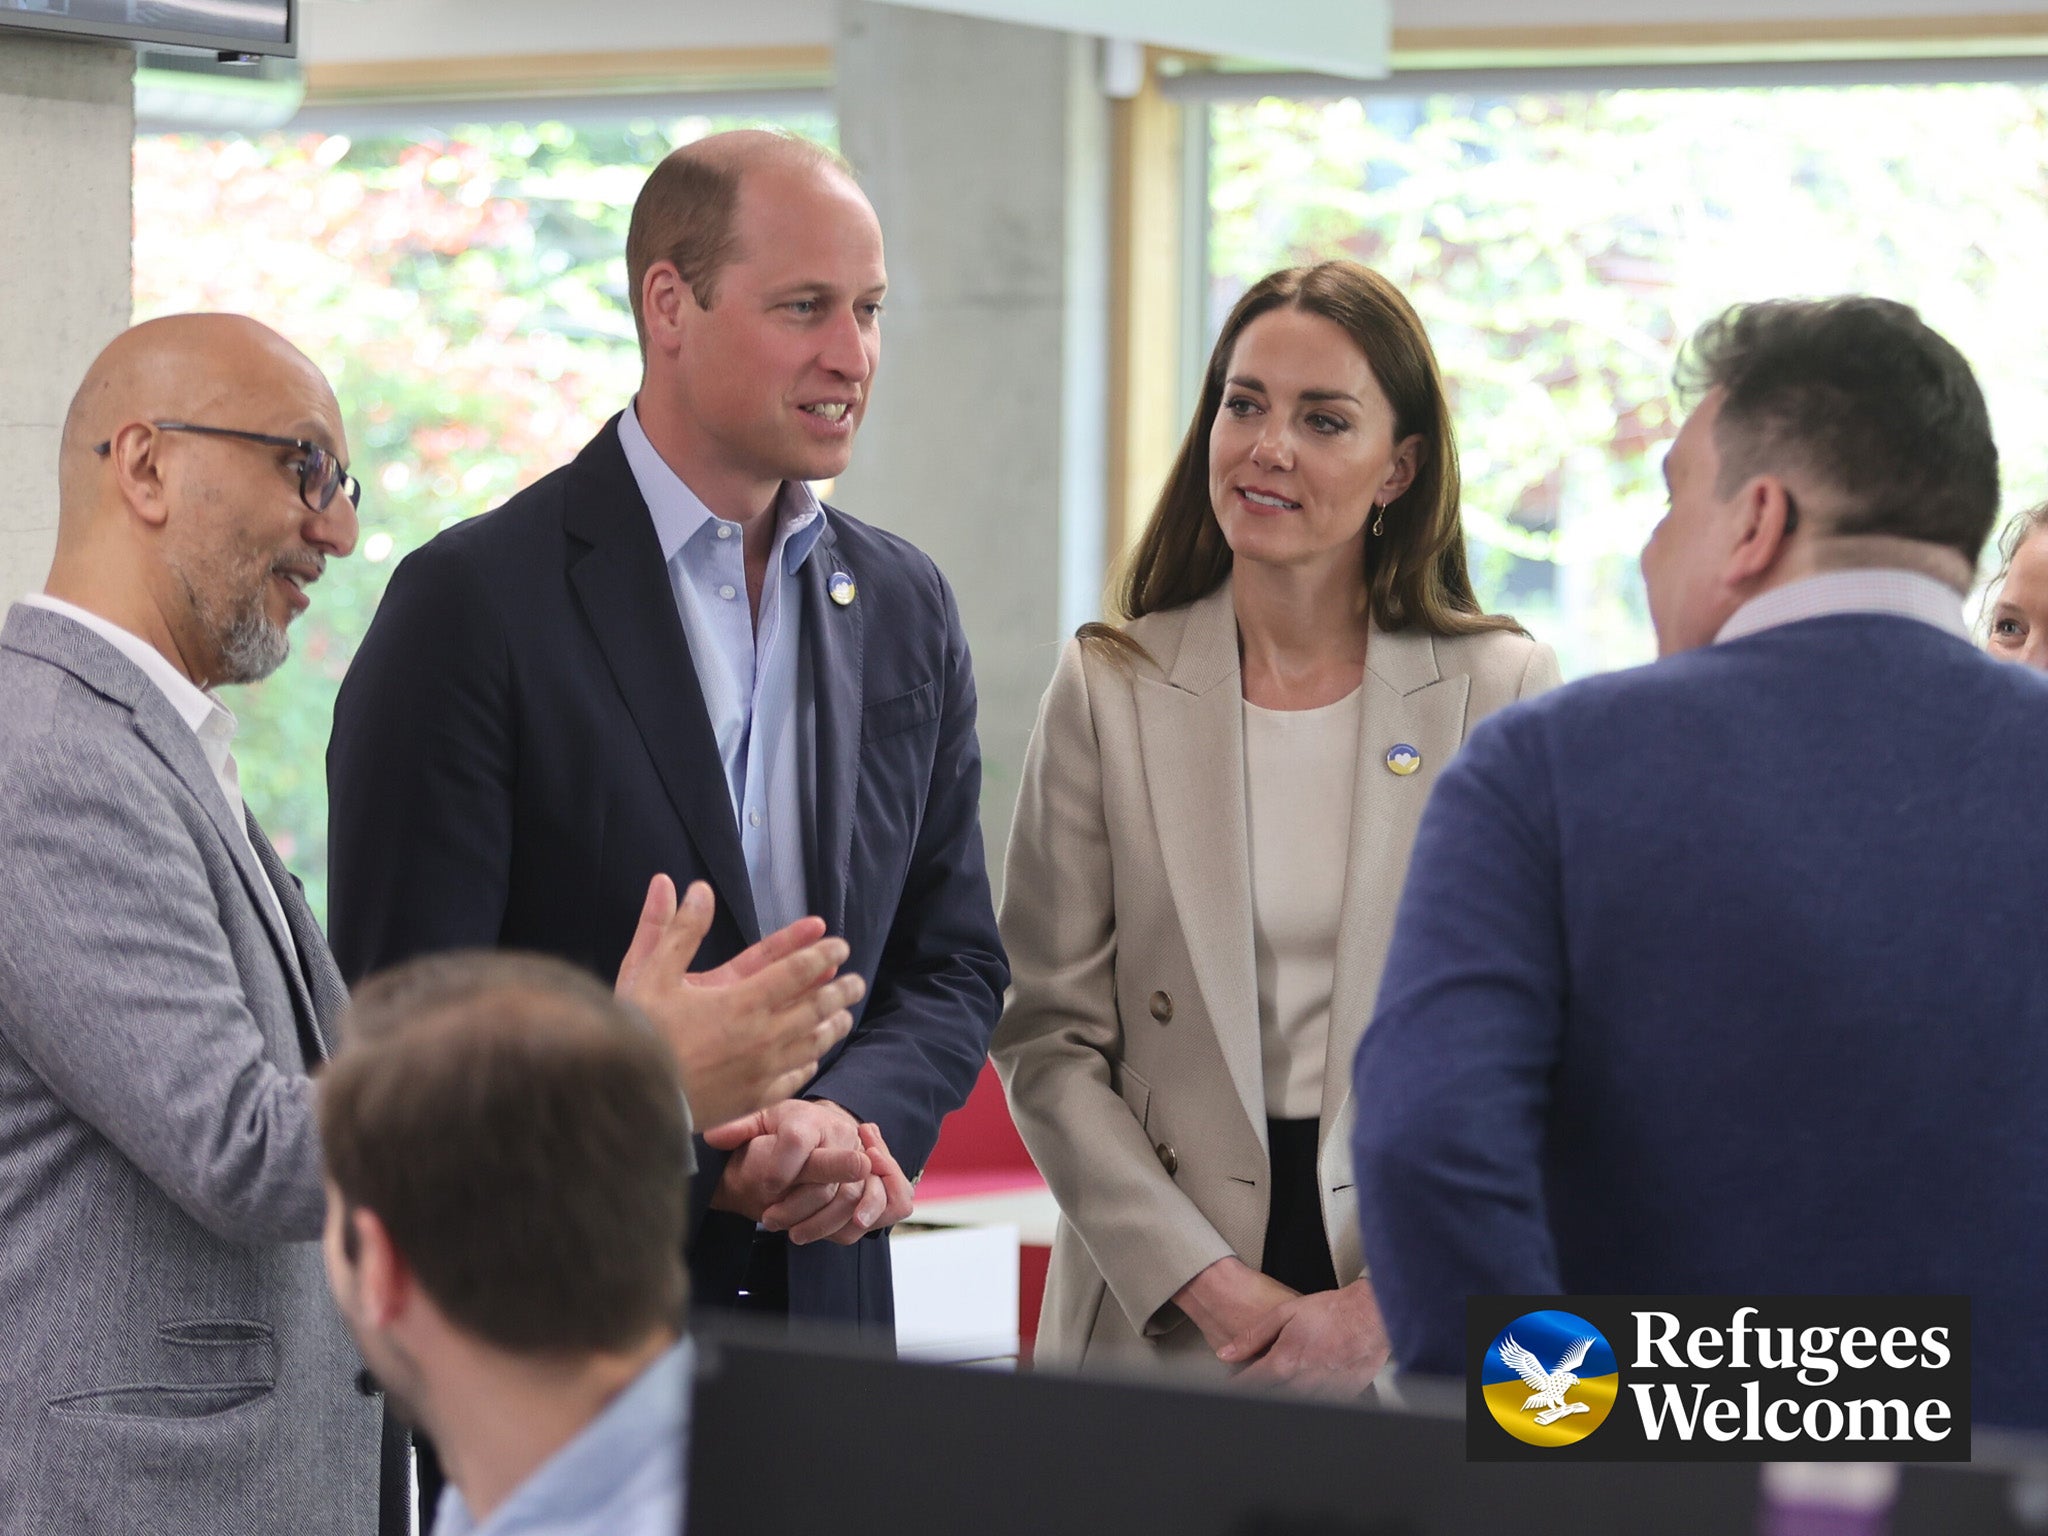 The duke and duchess speak to staff at the DEC offices in London on Thursday